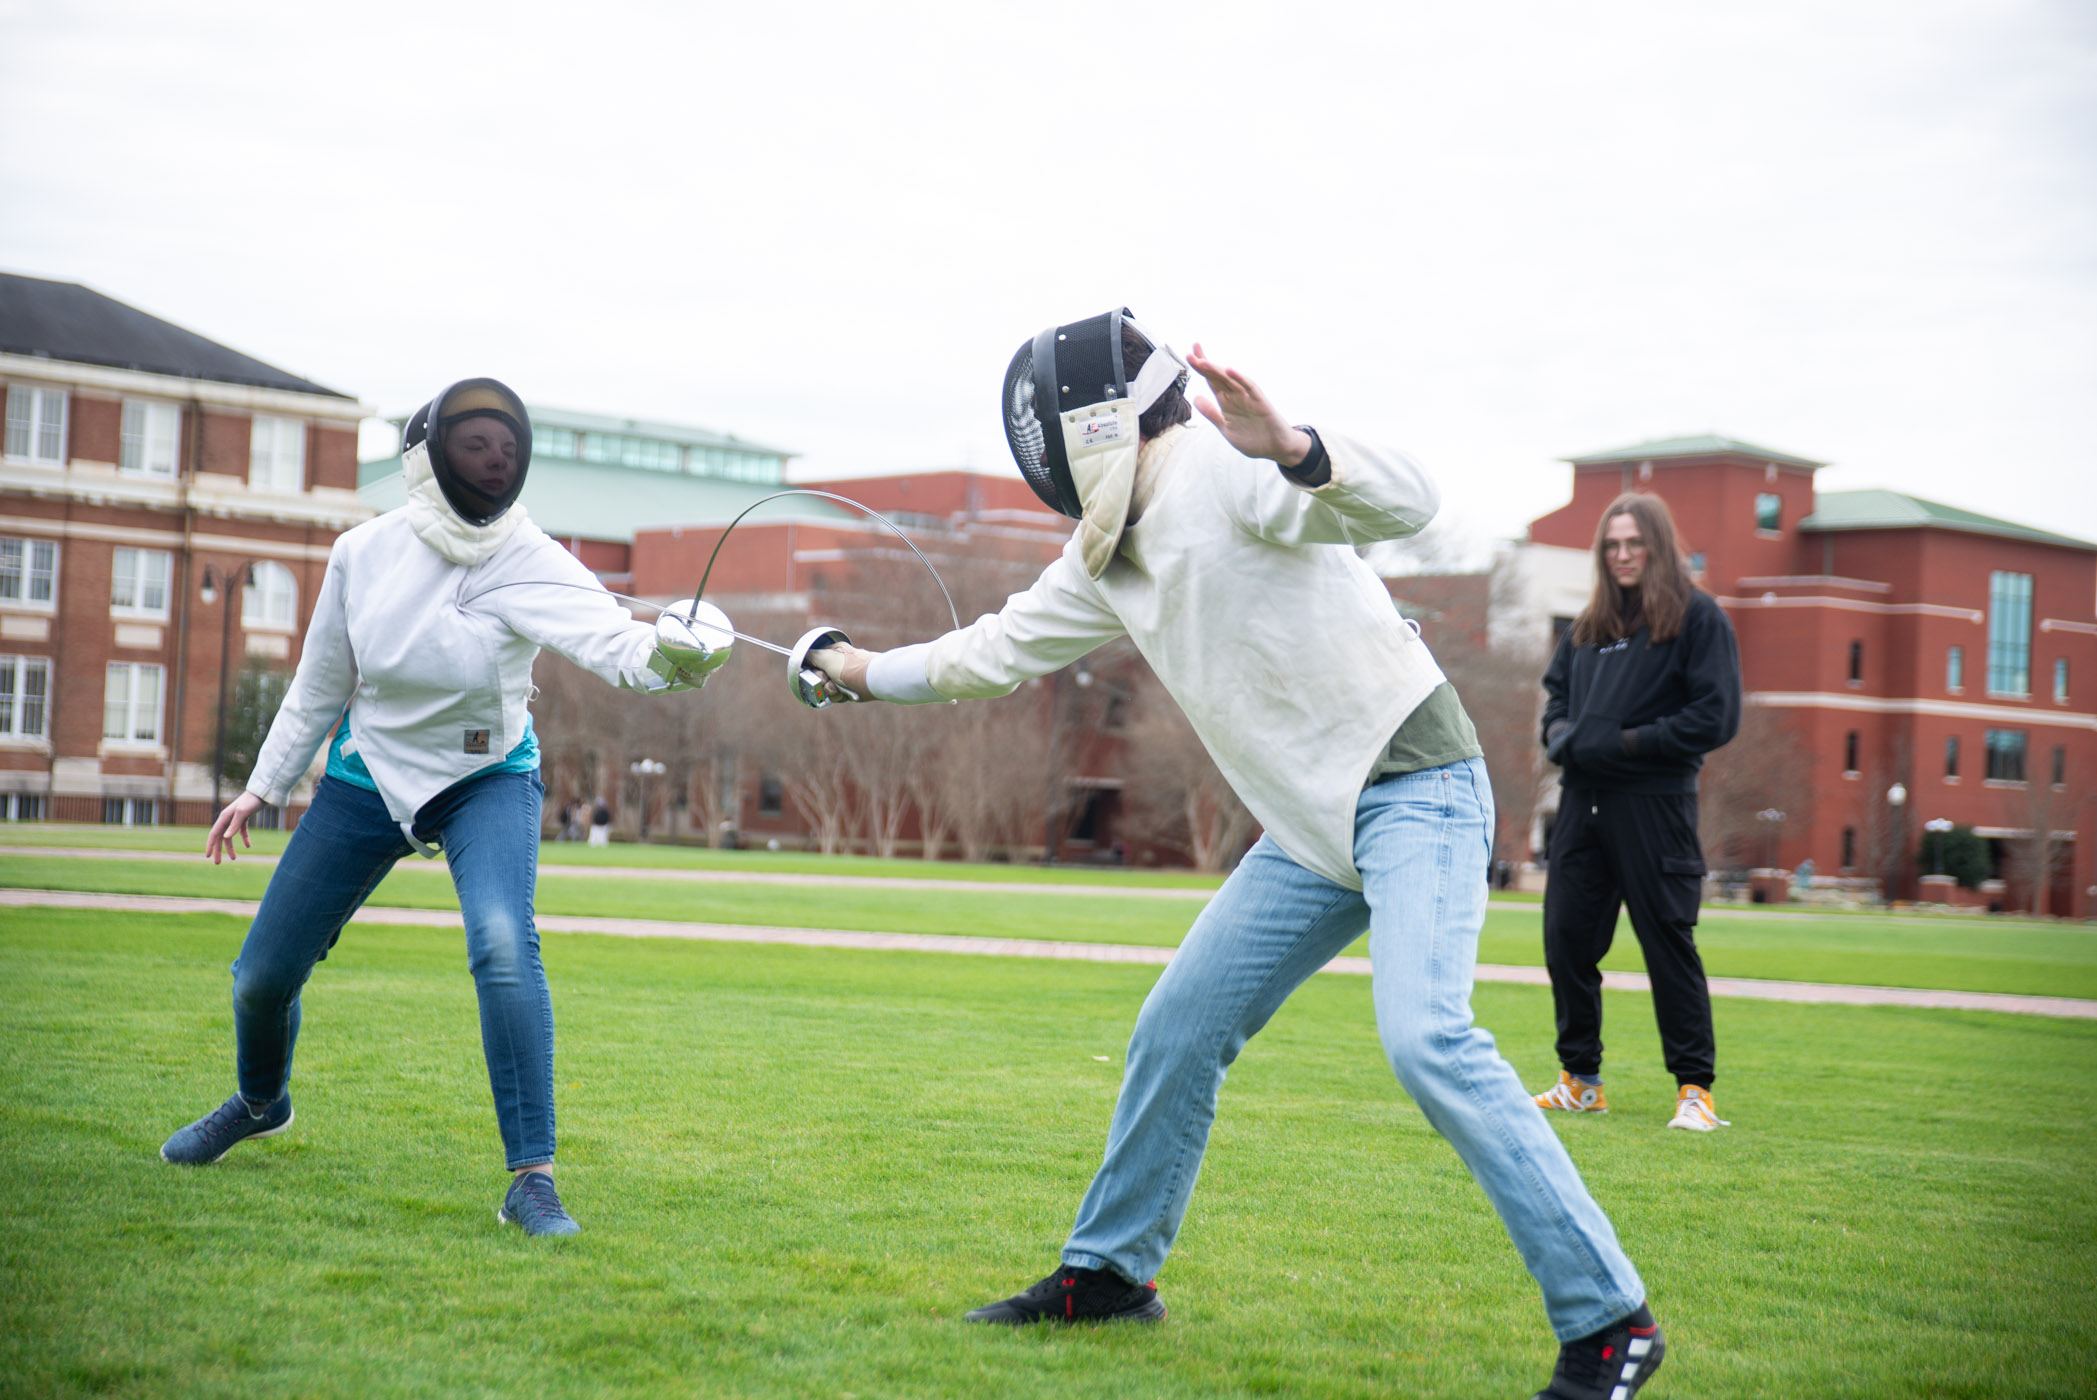 Members of the MSU Fencing Club take advantage of a spring day to practice their sport.